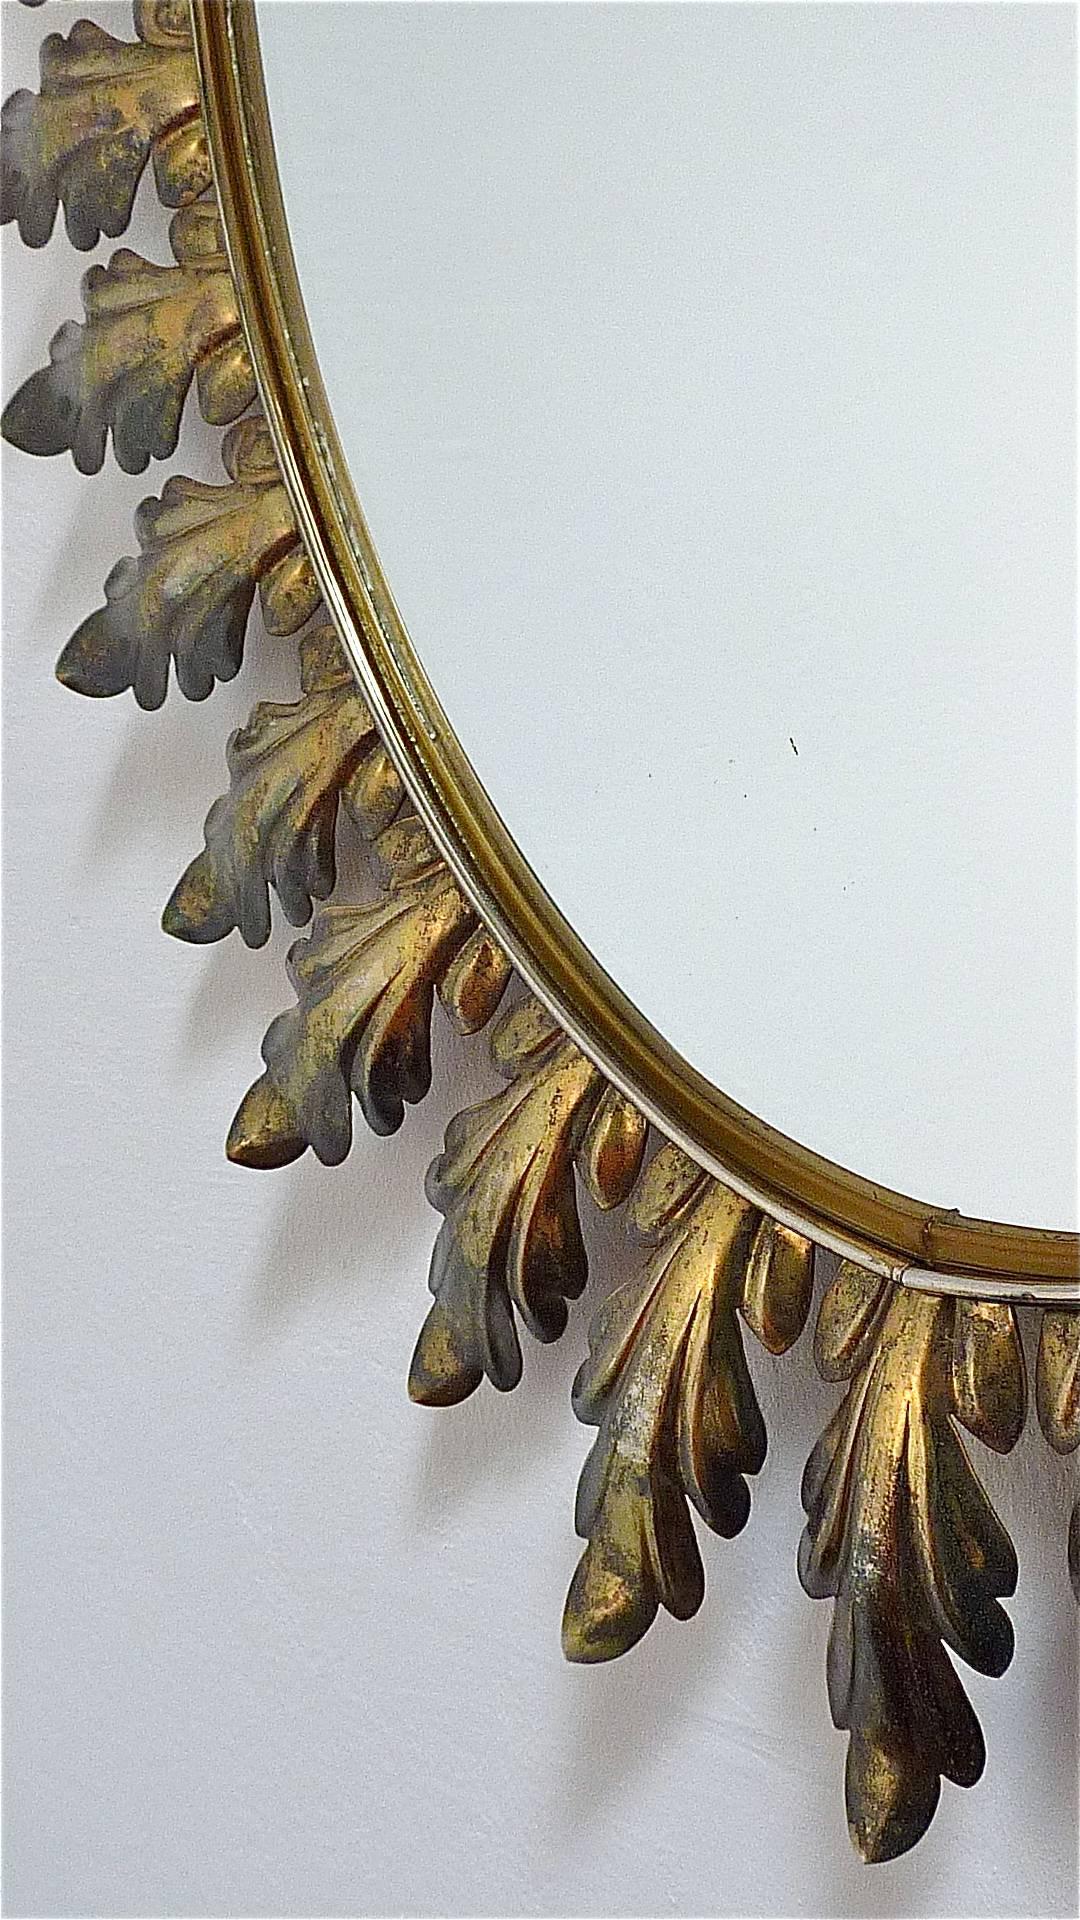 Large Midcentury Wall Mirror Patinated Brass Oval Floral Leaf Sunburst 1950s (Patiniert)